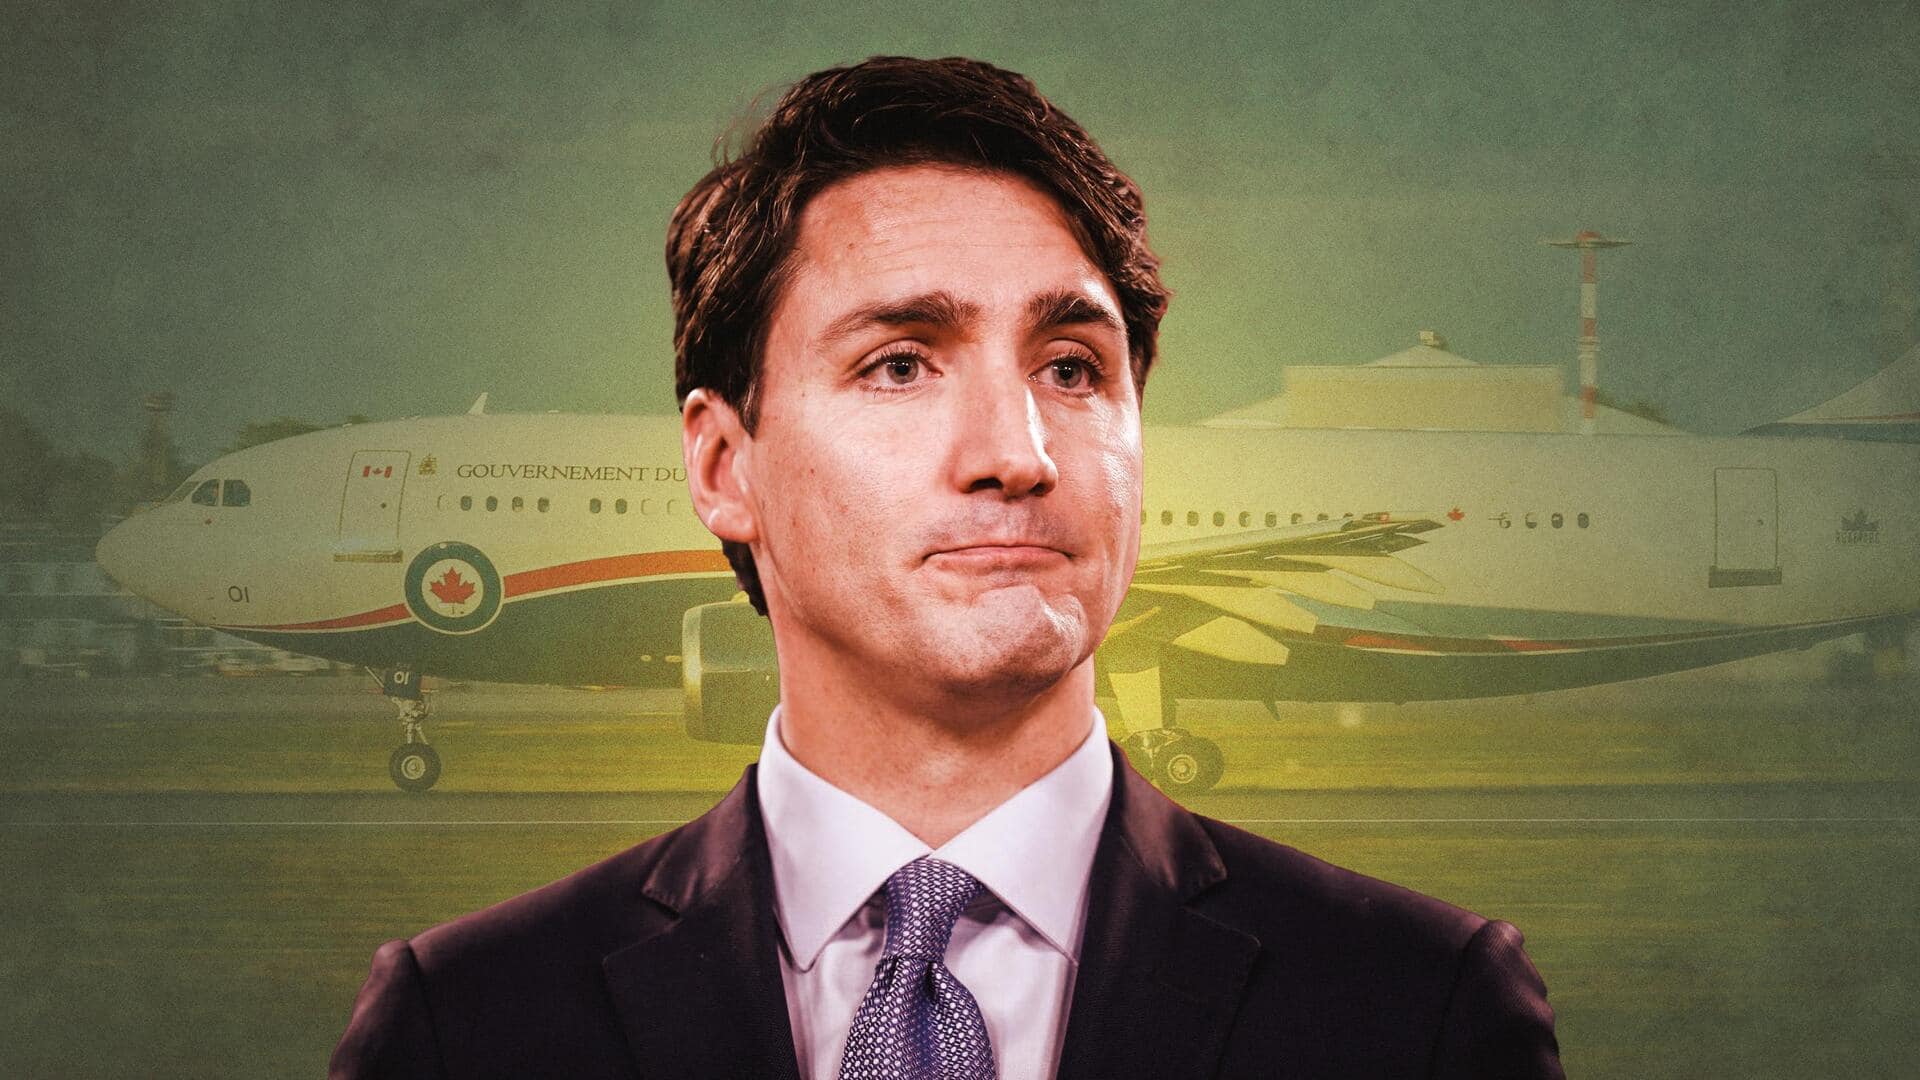 After G20 snub and plane woes, Trudeau to return home